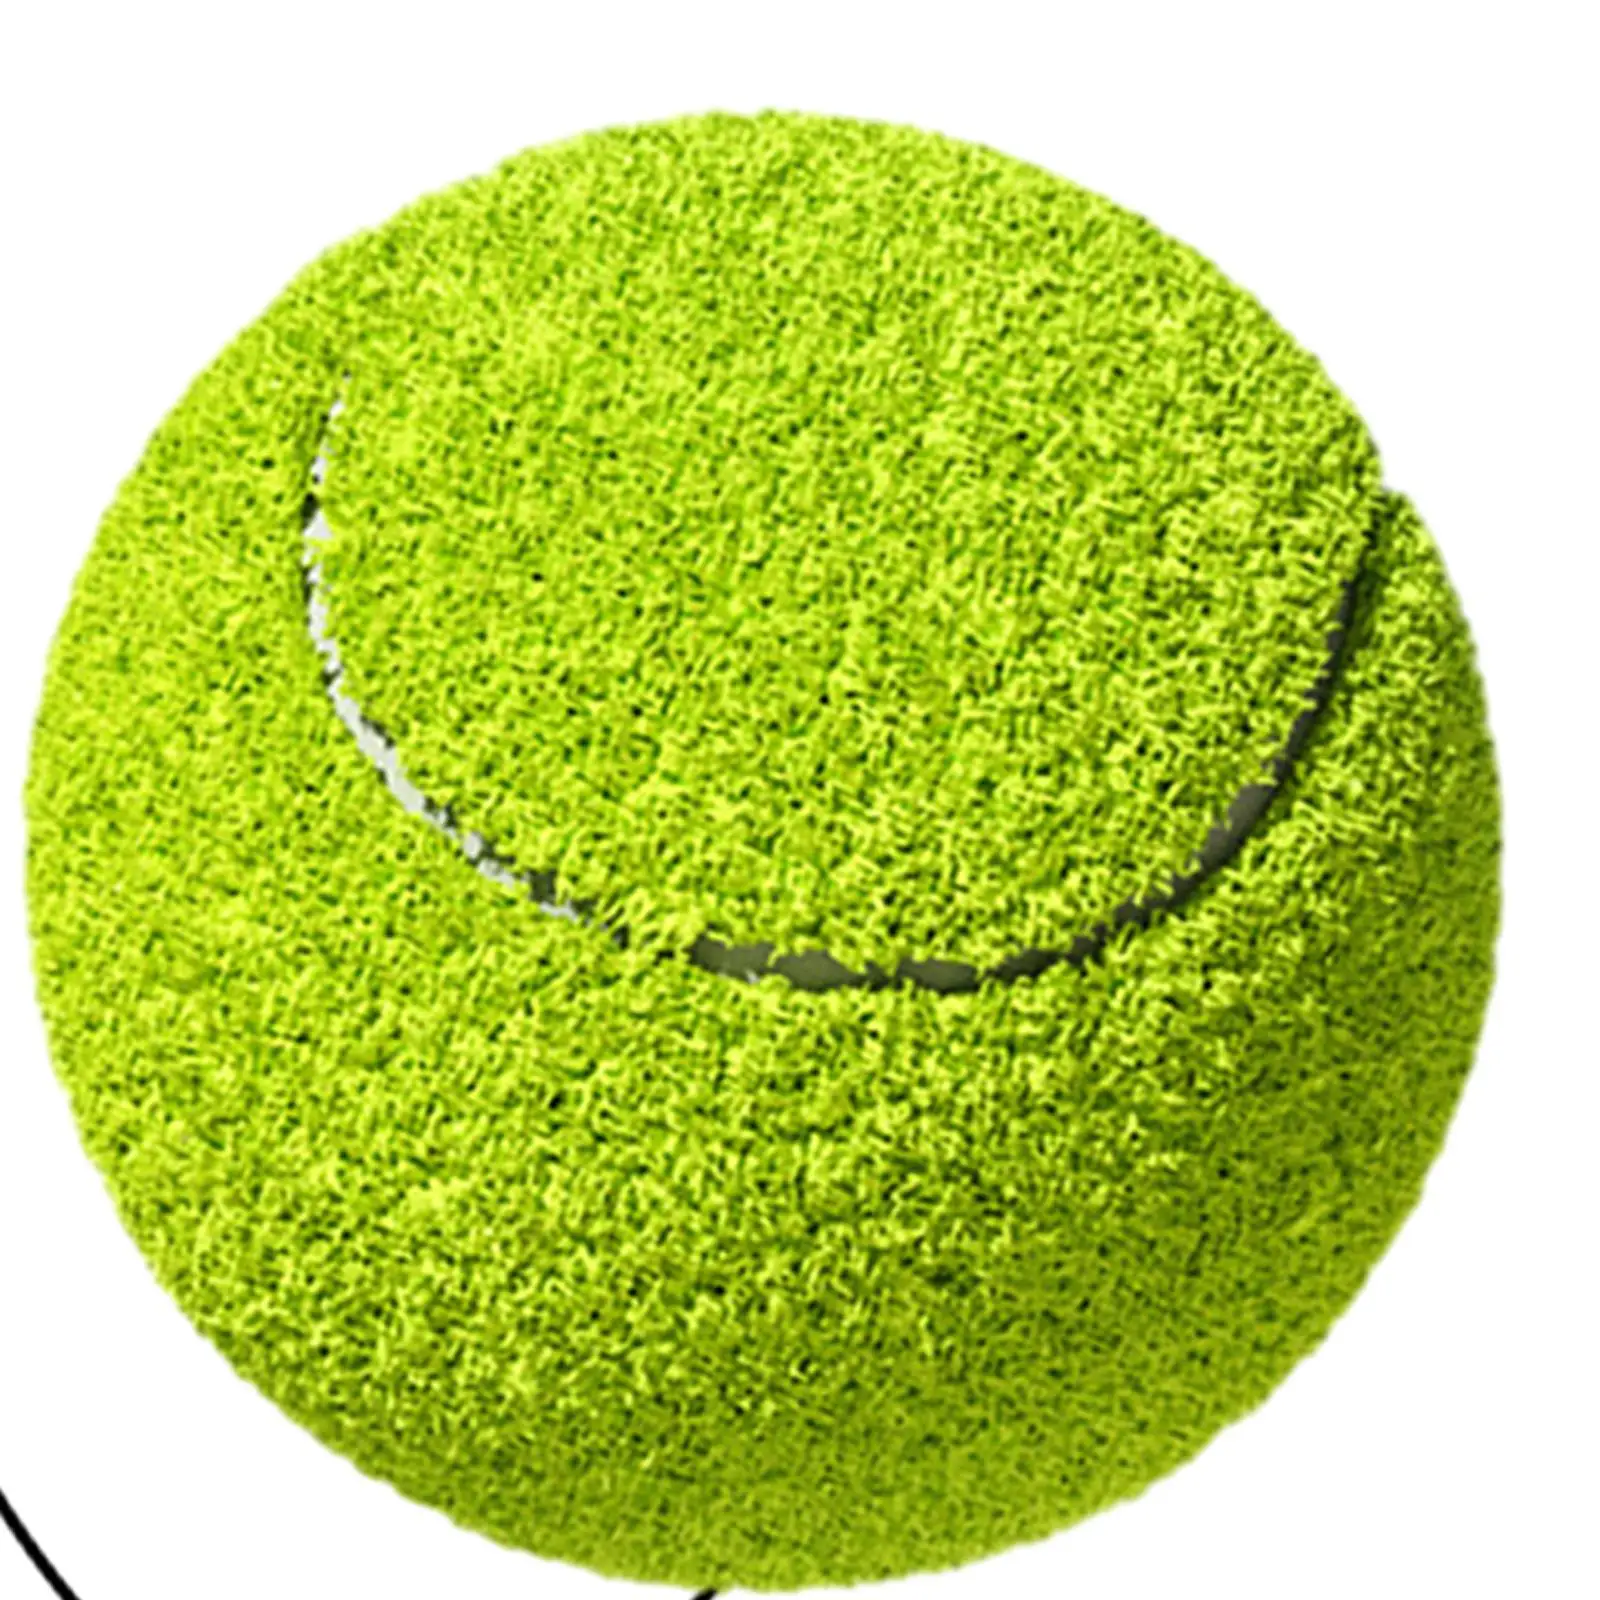 Wristband Toys Outdoor Baseball Rubber Rebound Ball for Teens Adults Gifts